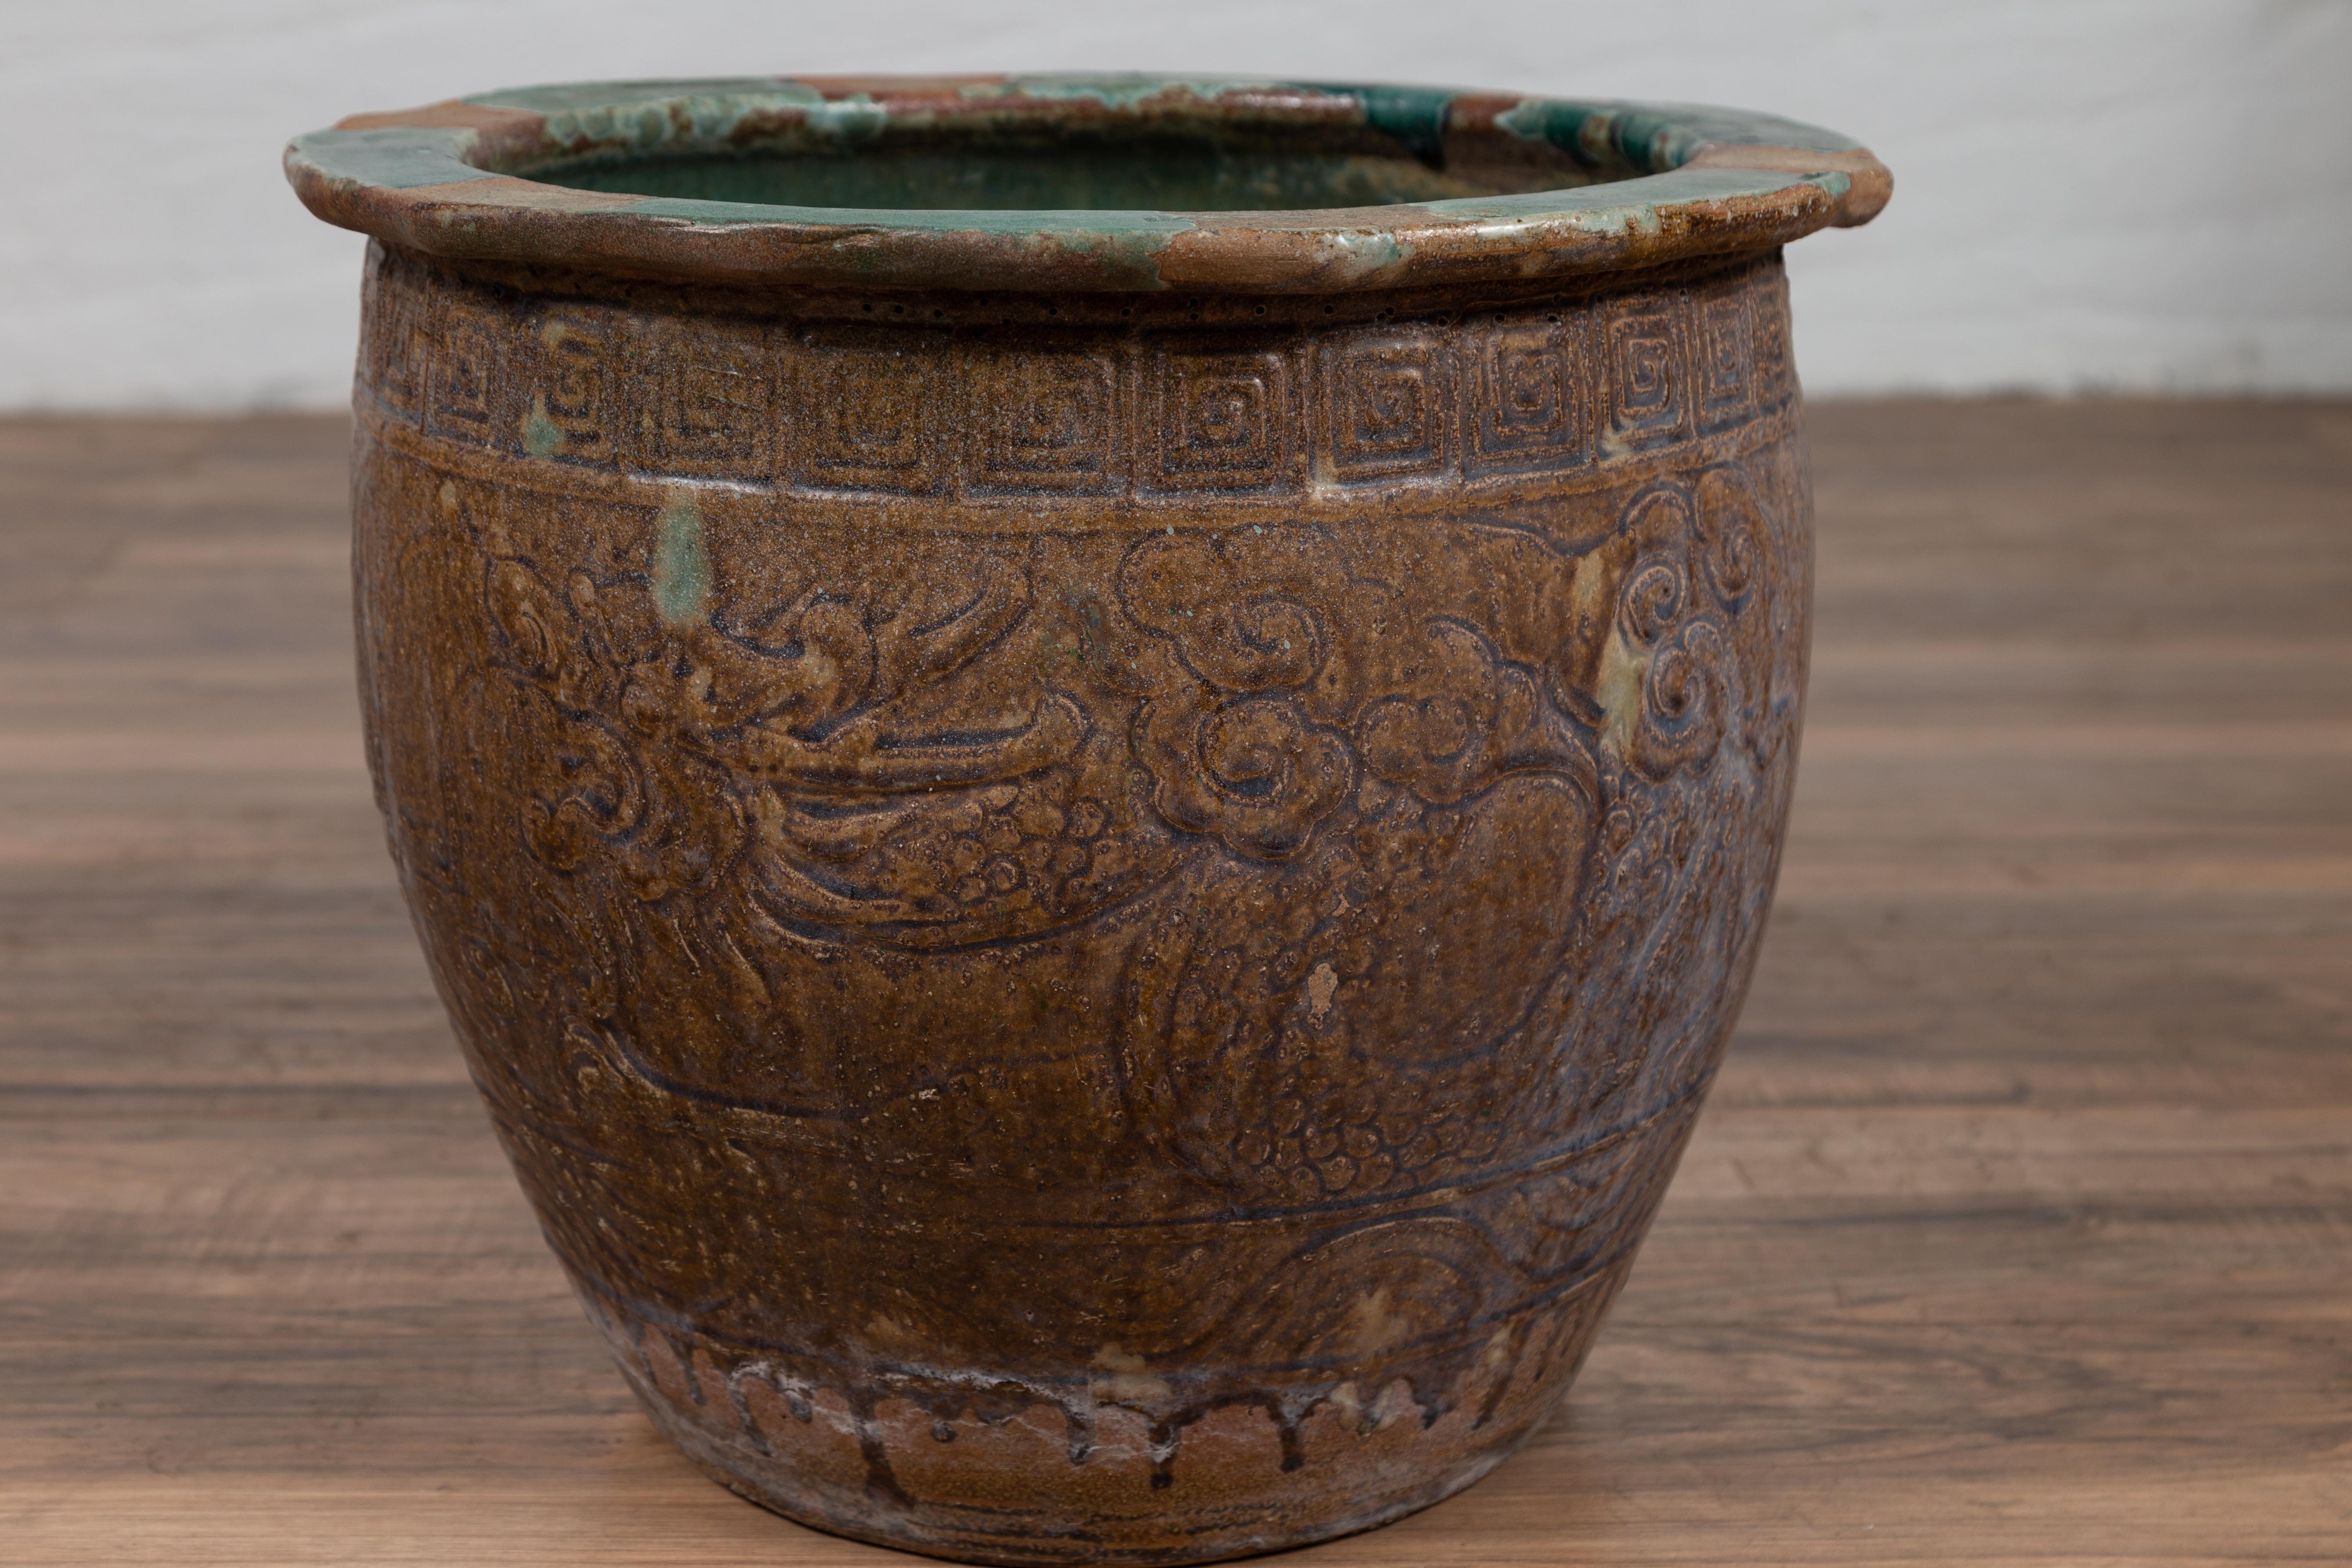 Glazed Chinese Antique Planter with Weathered Patina, Greek Key, Animals and Clouds